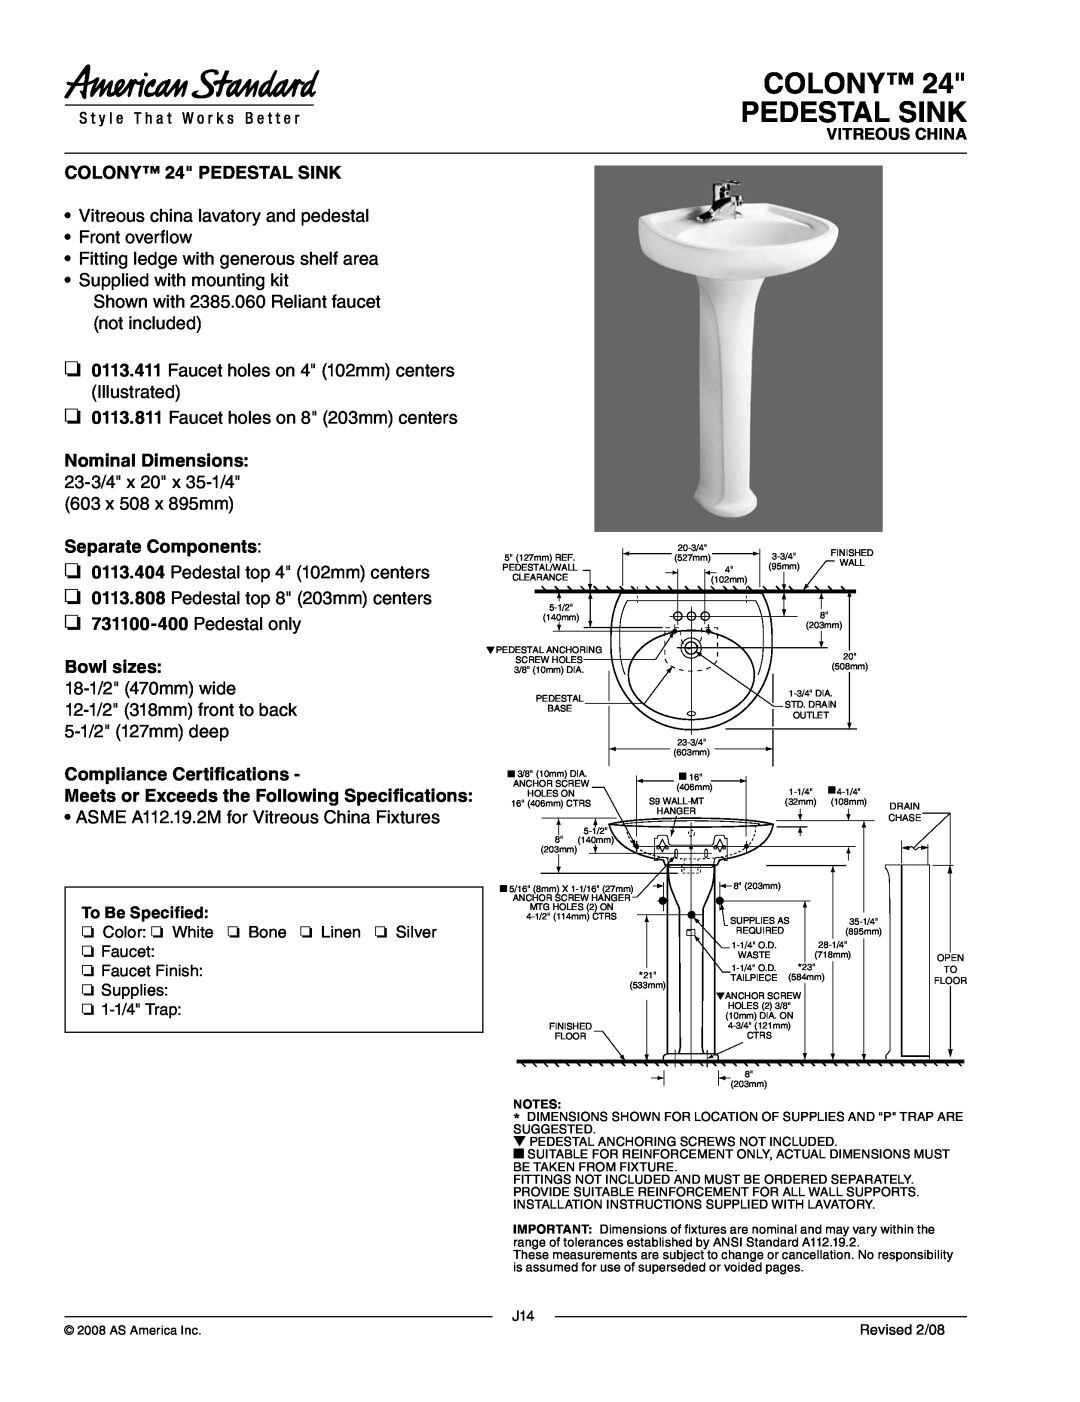 American Standard 0113.811 dimensions Colony Pedestal Sink, COLONY 24 PEDESTAL SINK, Separate Components, Bowl sizes 